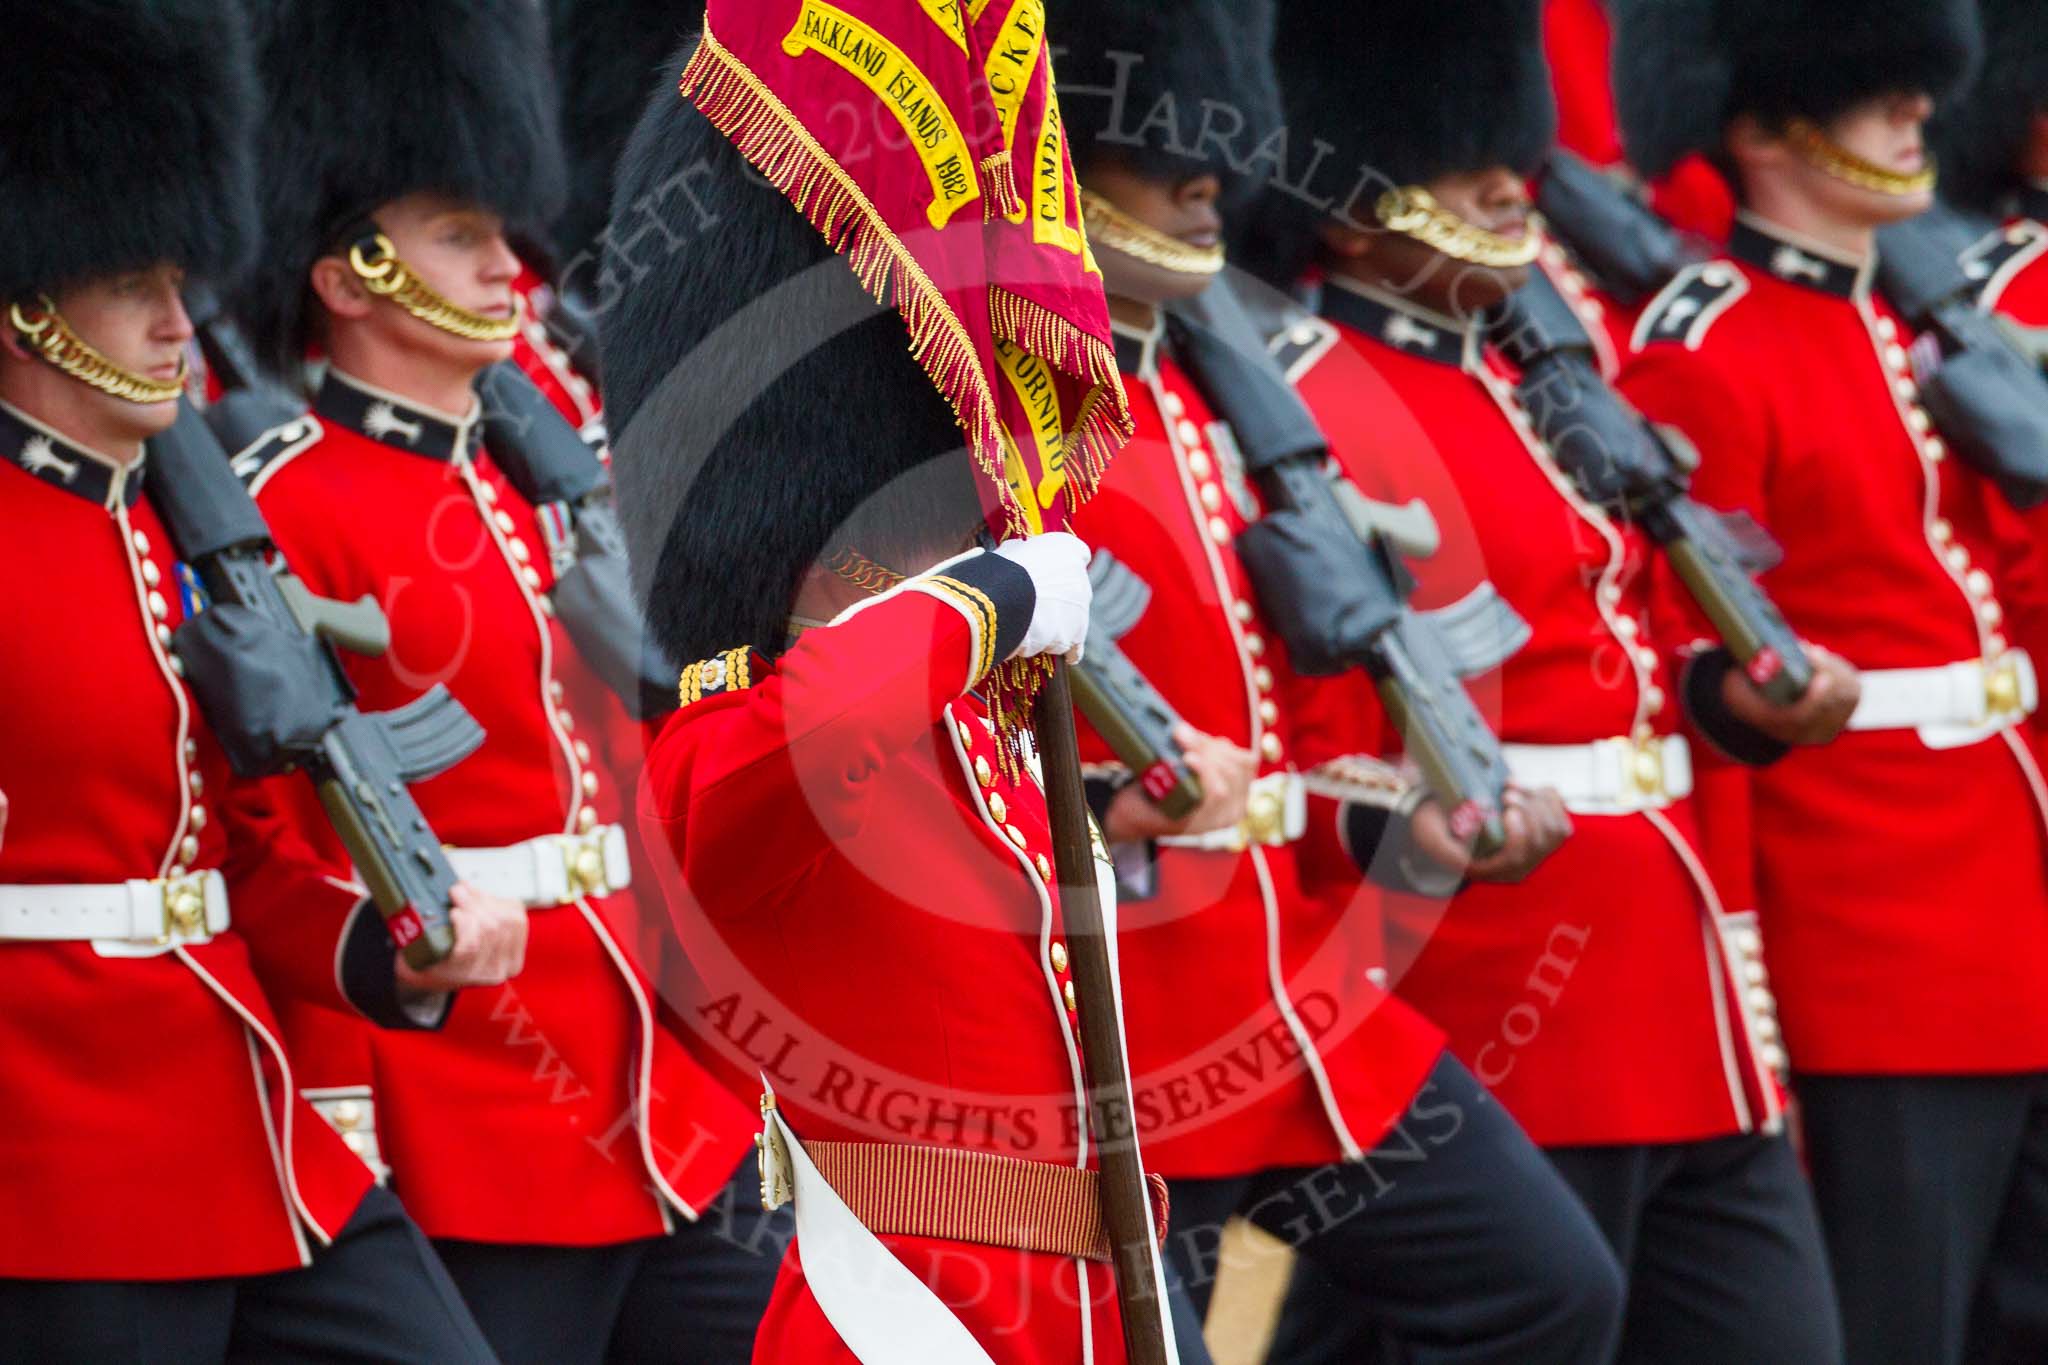 Trooping the Colour 2015. Image #449, 13 June 2015 11:34 Horse Guards Parade, London, UK